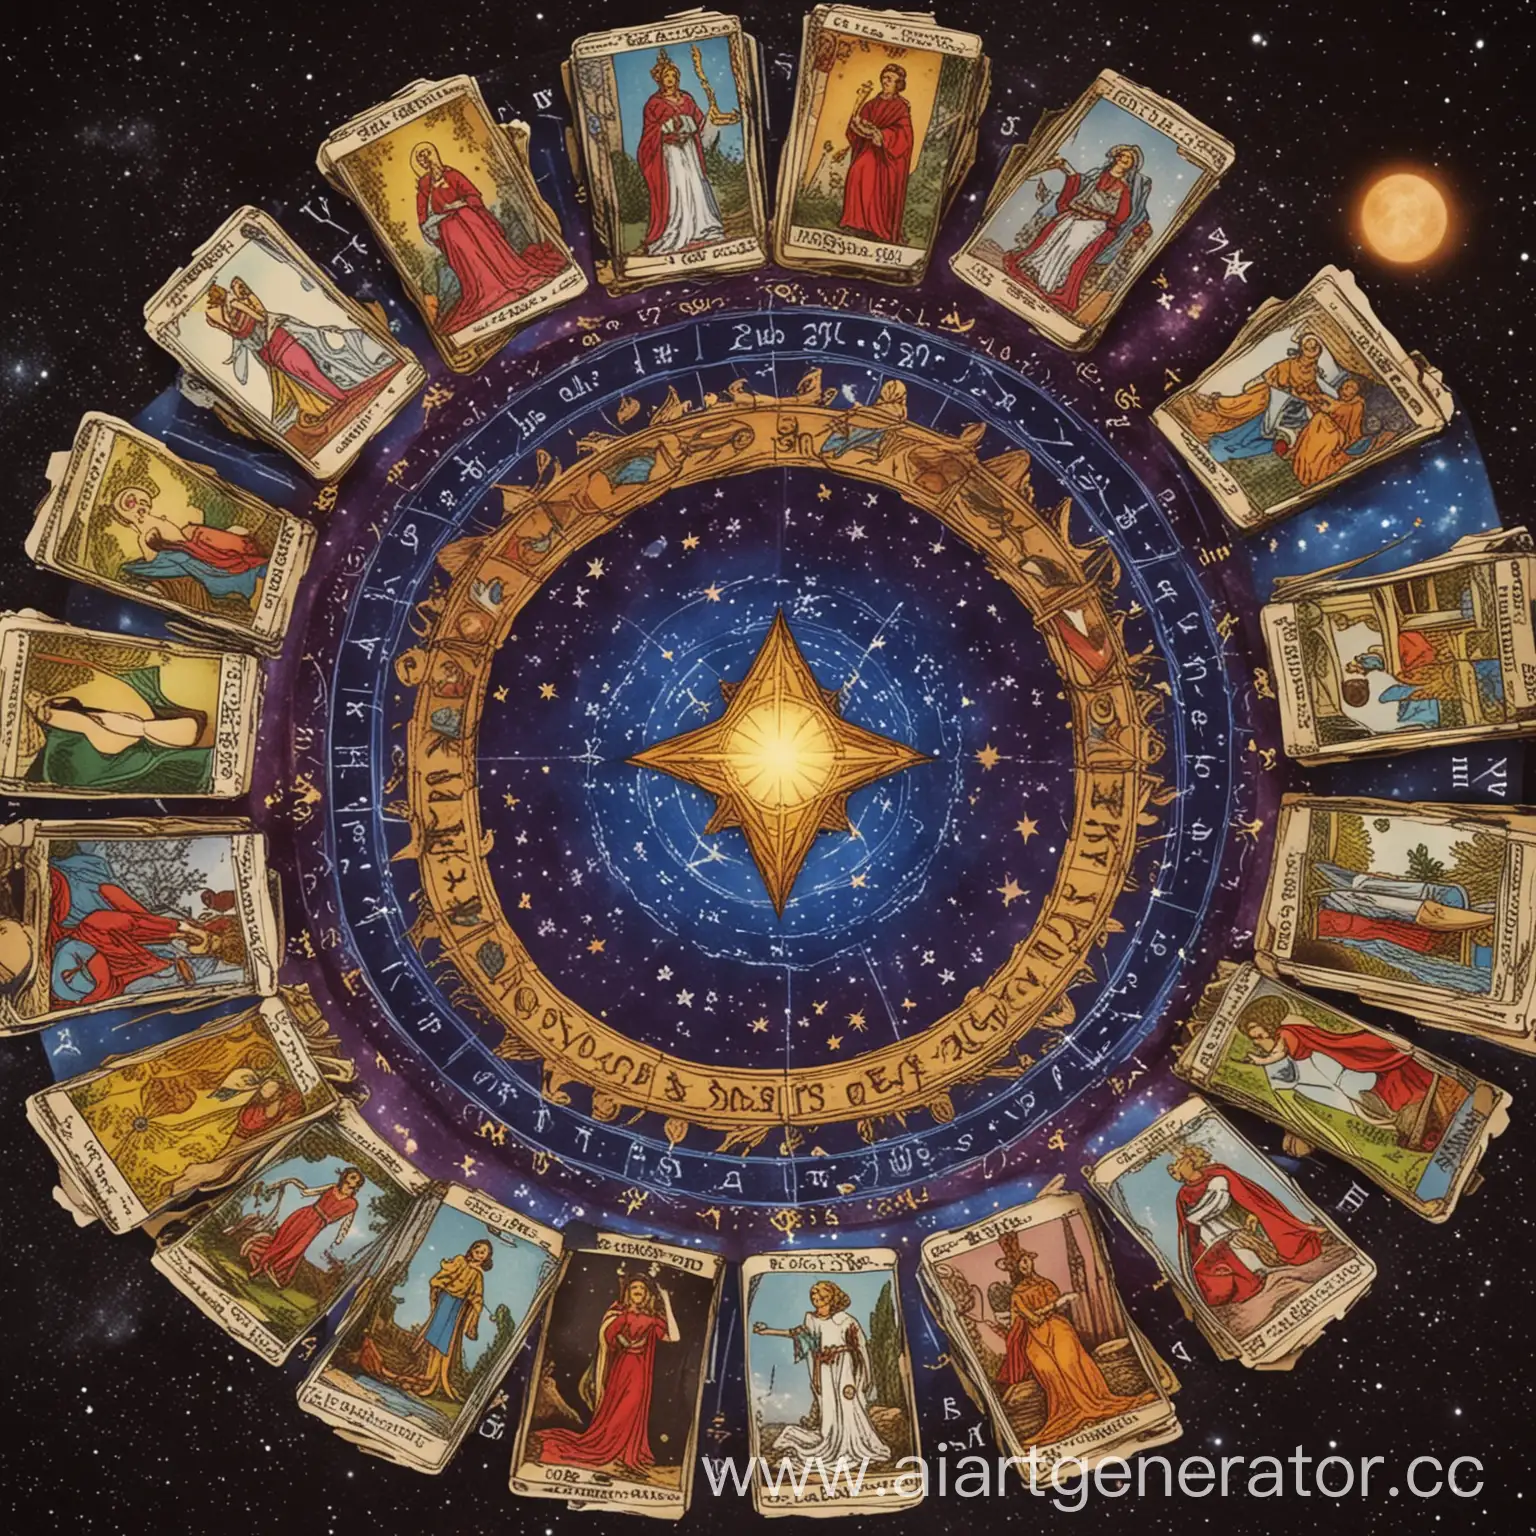 Mystical-Tarot-Readings-and-Horoscope-Predictions-on-Star-Secrets-Channel